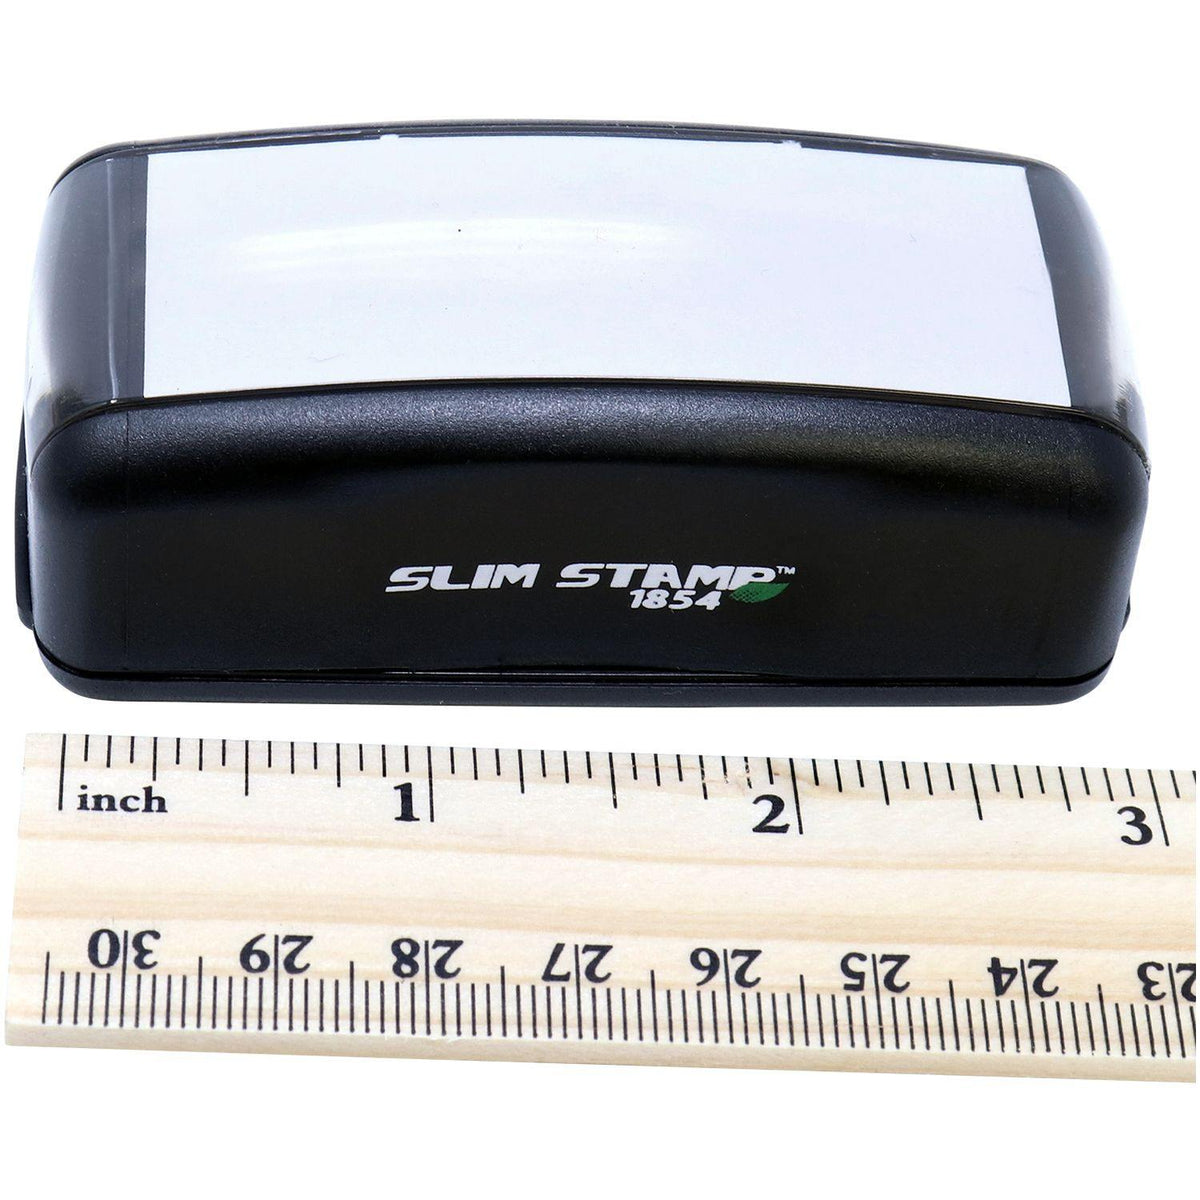 Measurement Large Pre-Inked Economy Rate Stamp with Ruler